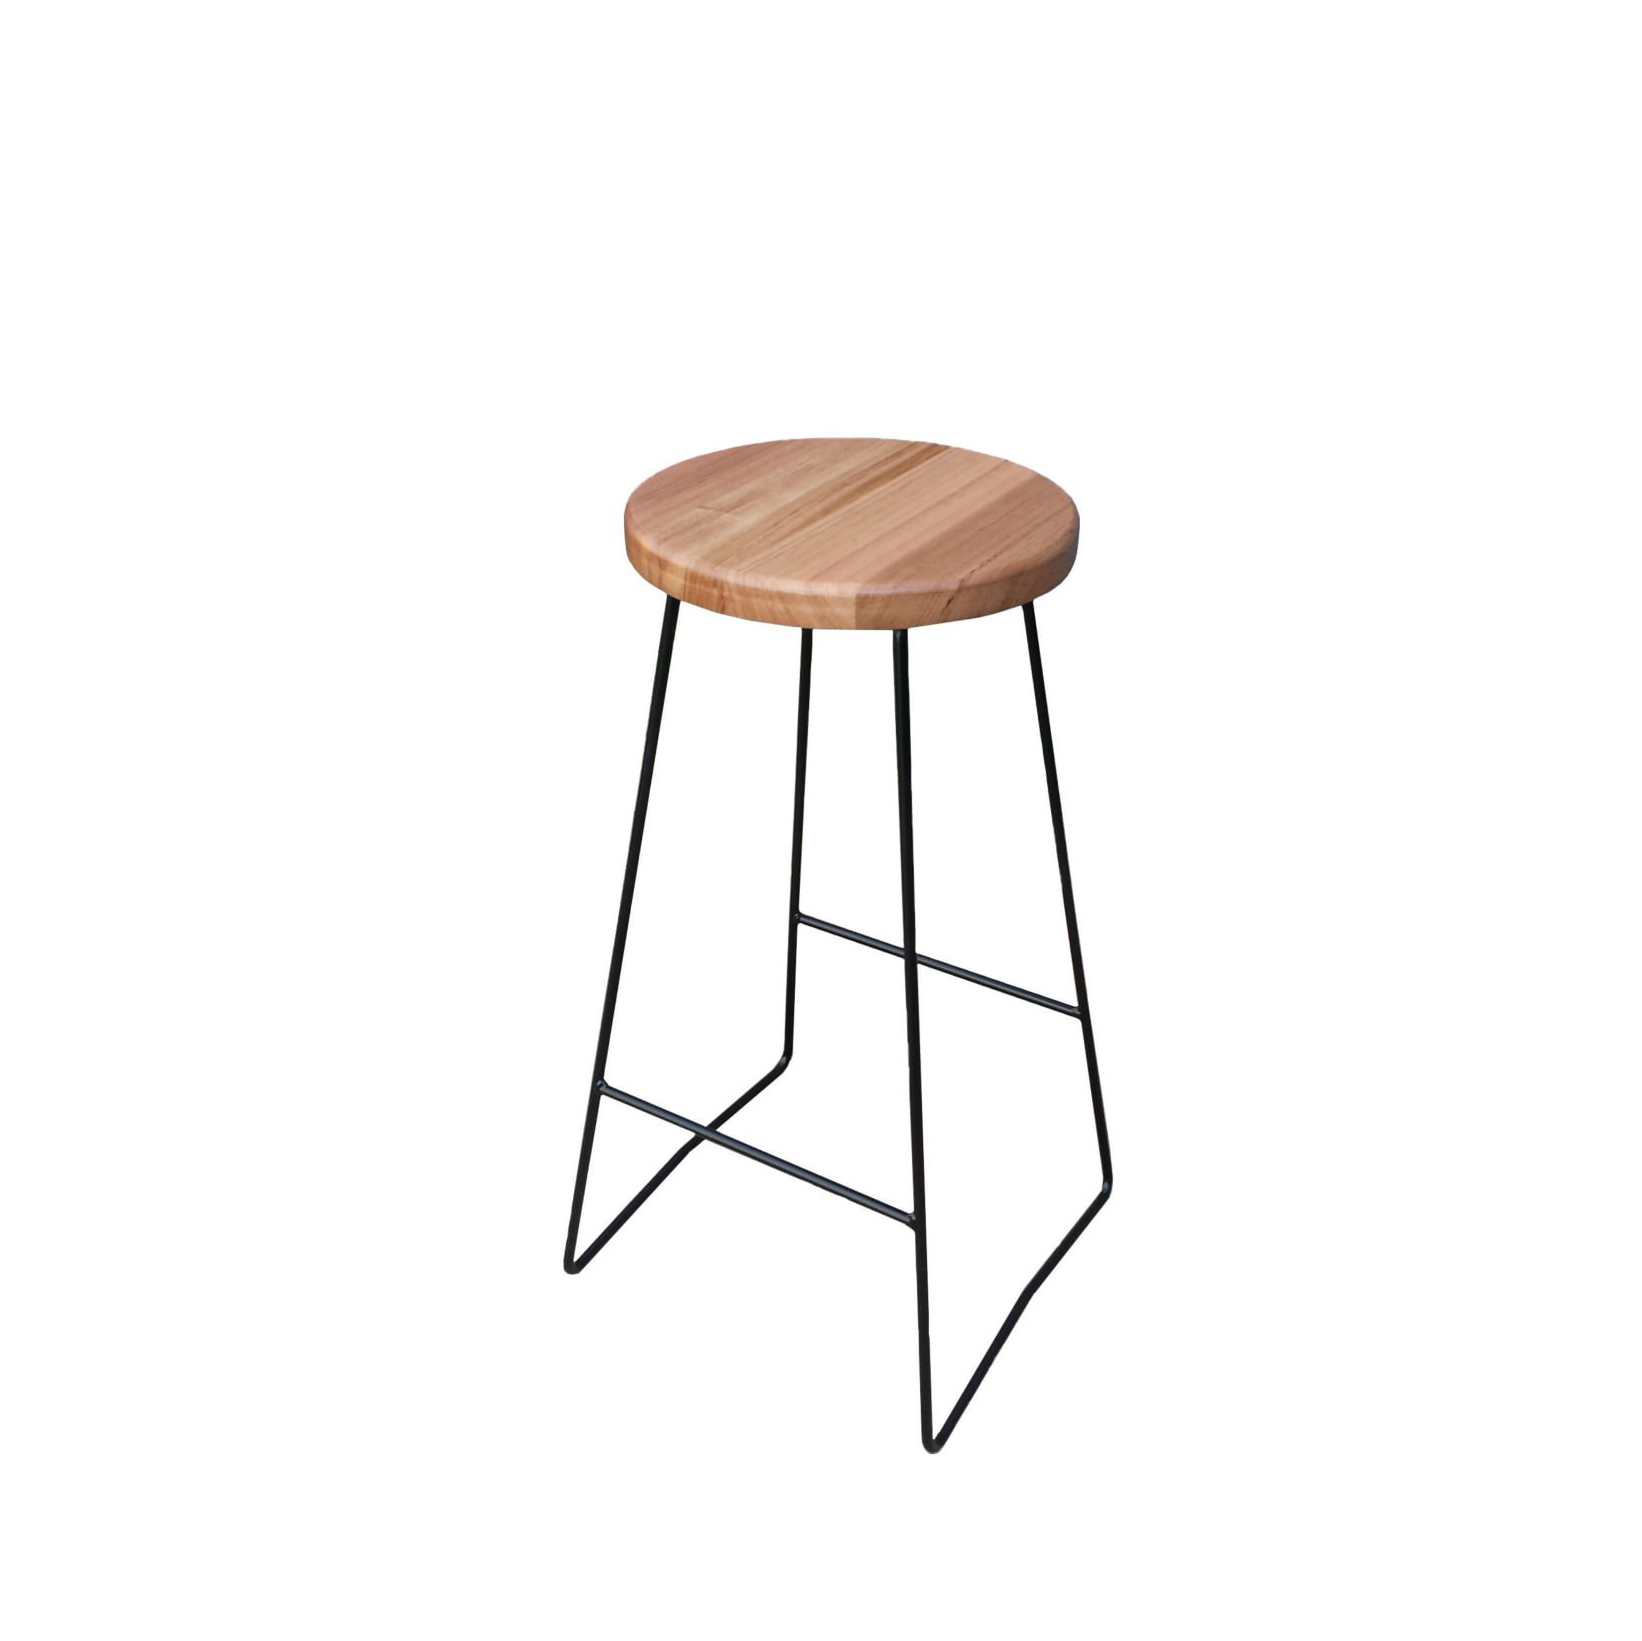 Harlow Stool with Round Wood Seat